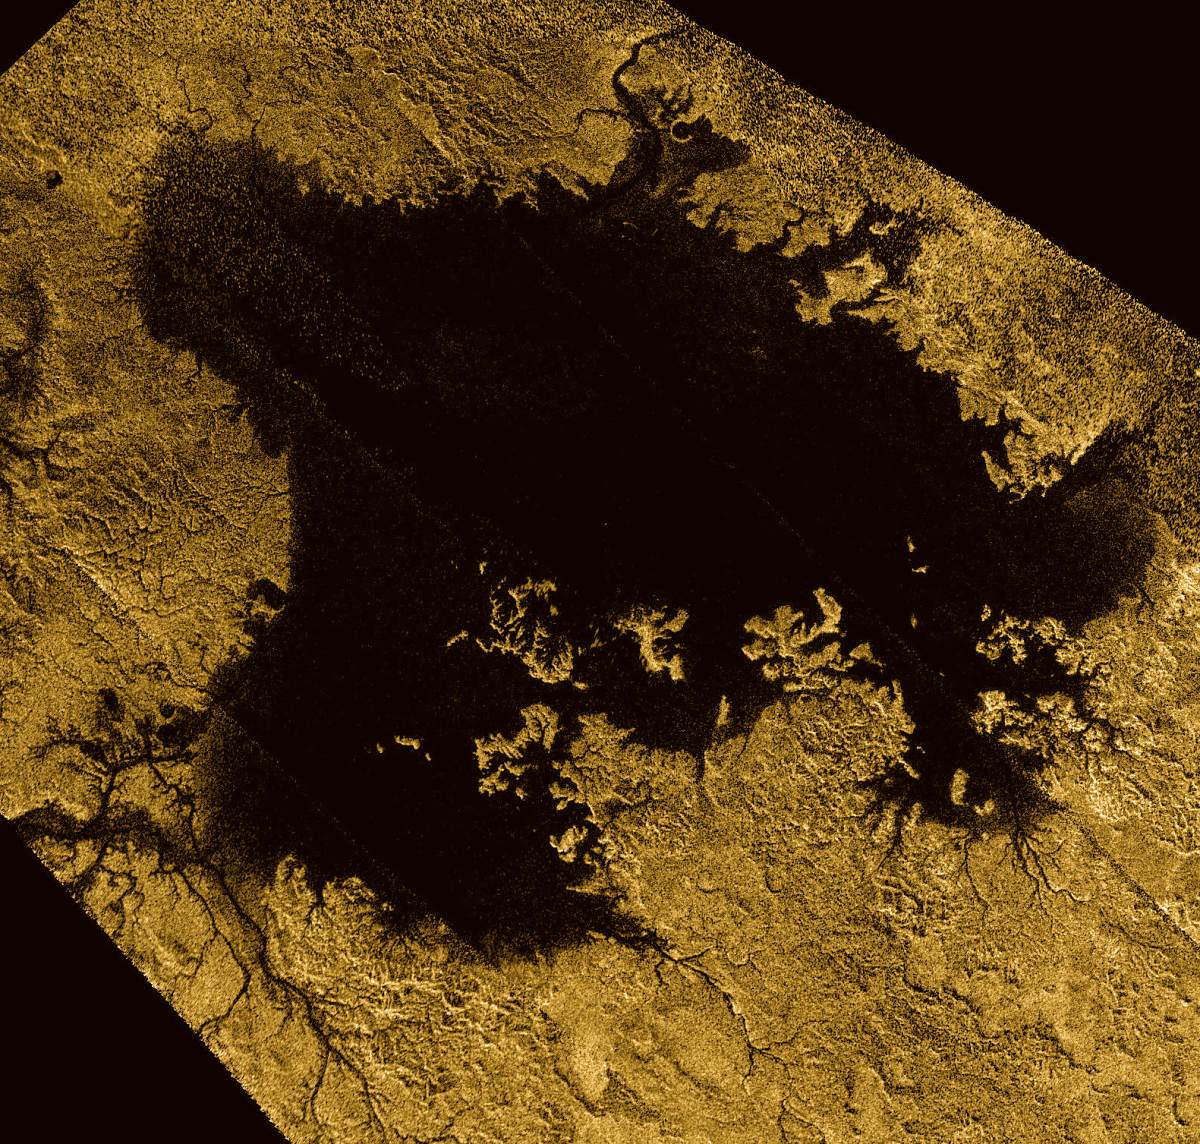 Ligeia Mare, the second largest known body of liquid on Saturn's moon Titan, shown in data obtained by NASA's Cassini spacecraft, is pictured in this NASA handout image released January 17, 2018. (REUTERS)